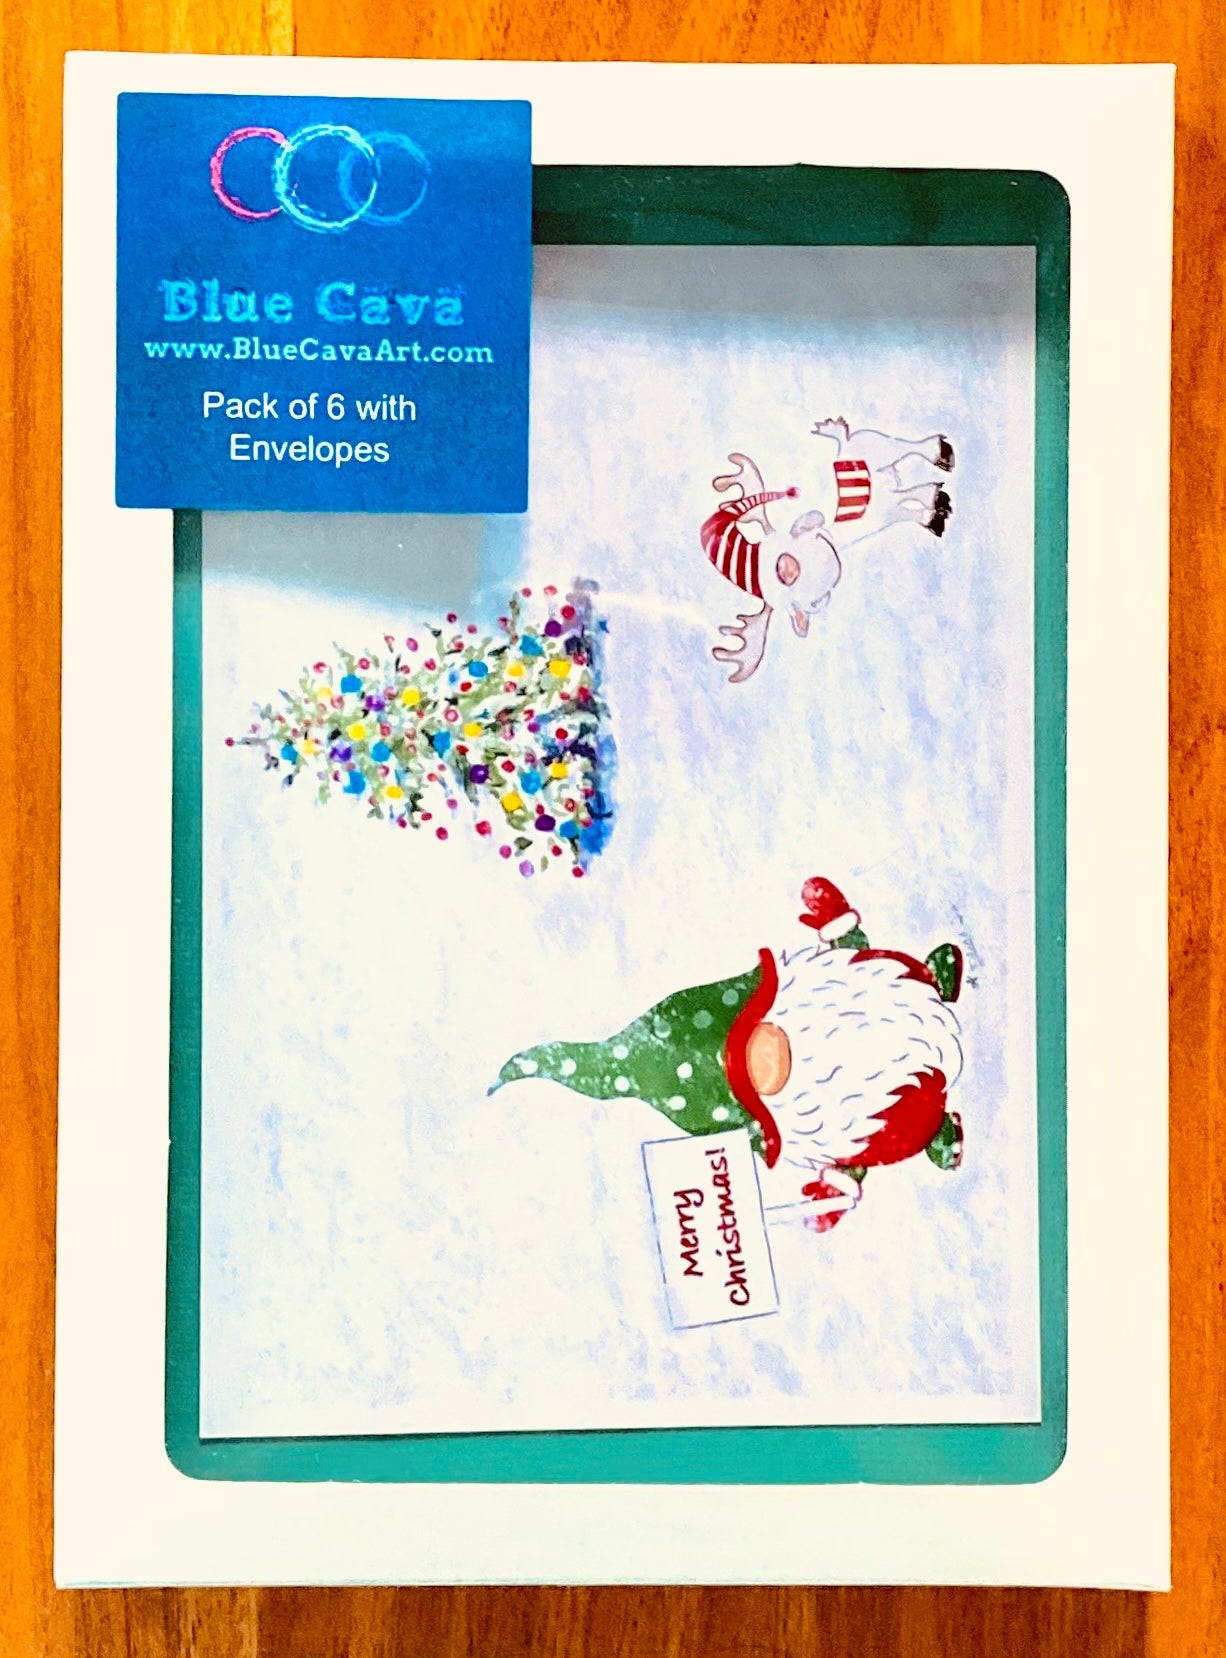 Cringle and Friend Christmas Tree Greeting cards (Two colors available) - Blue Cava